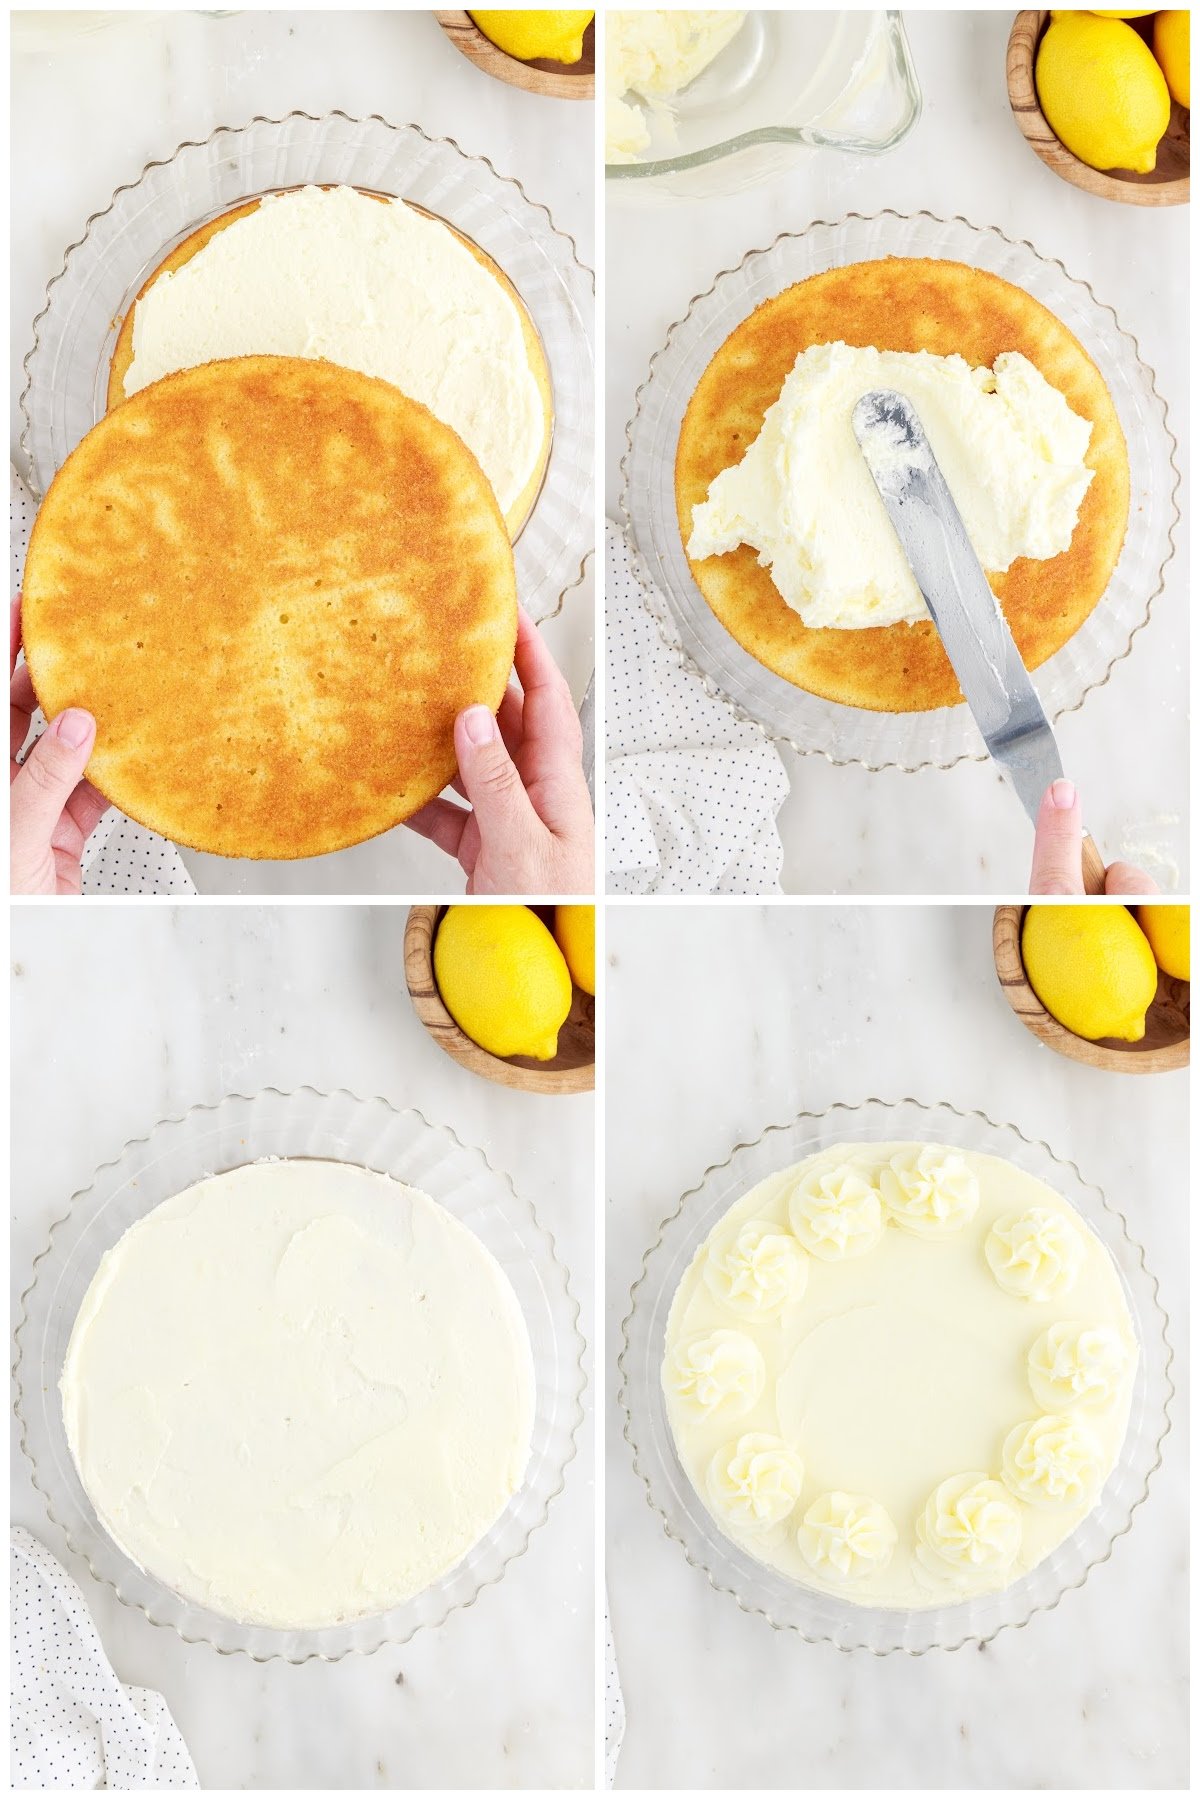 Four steps shown here to frost the cake.